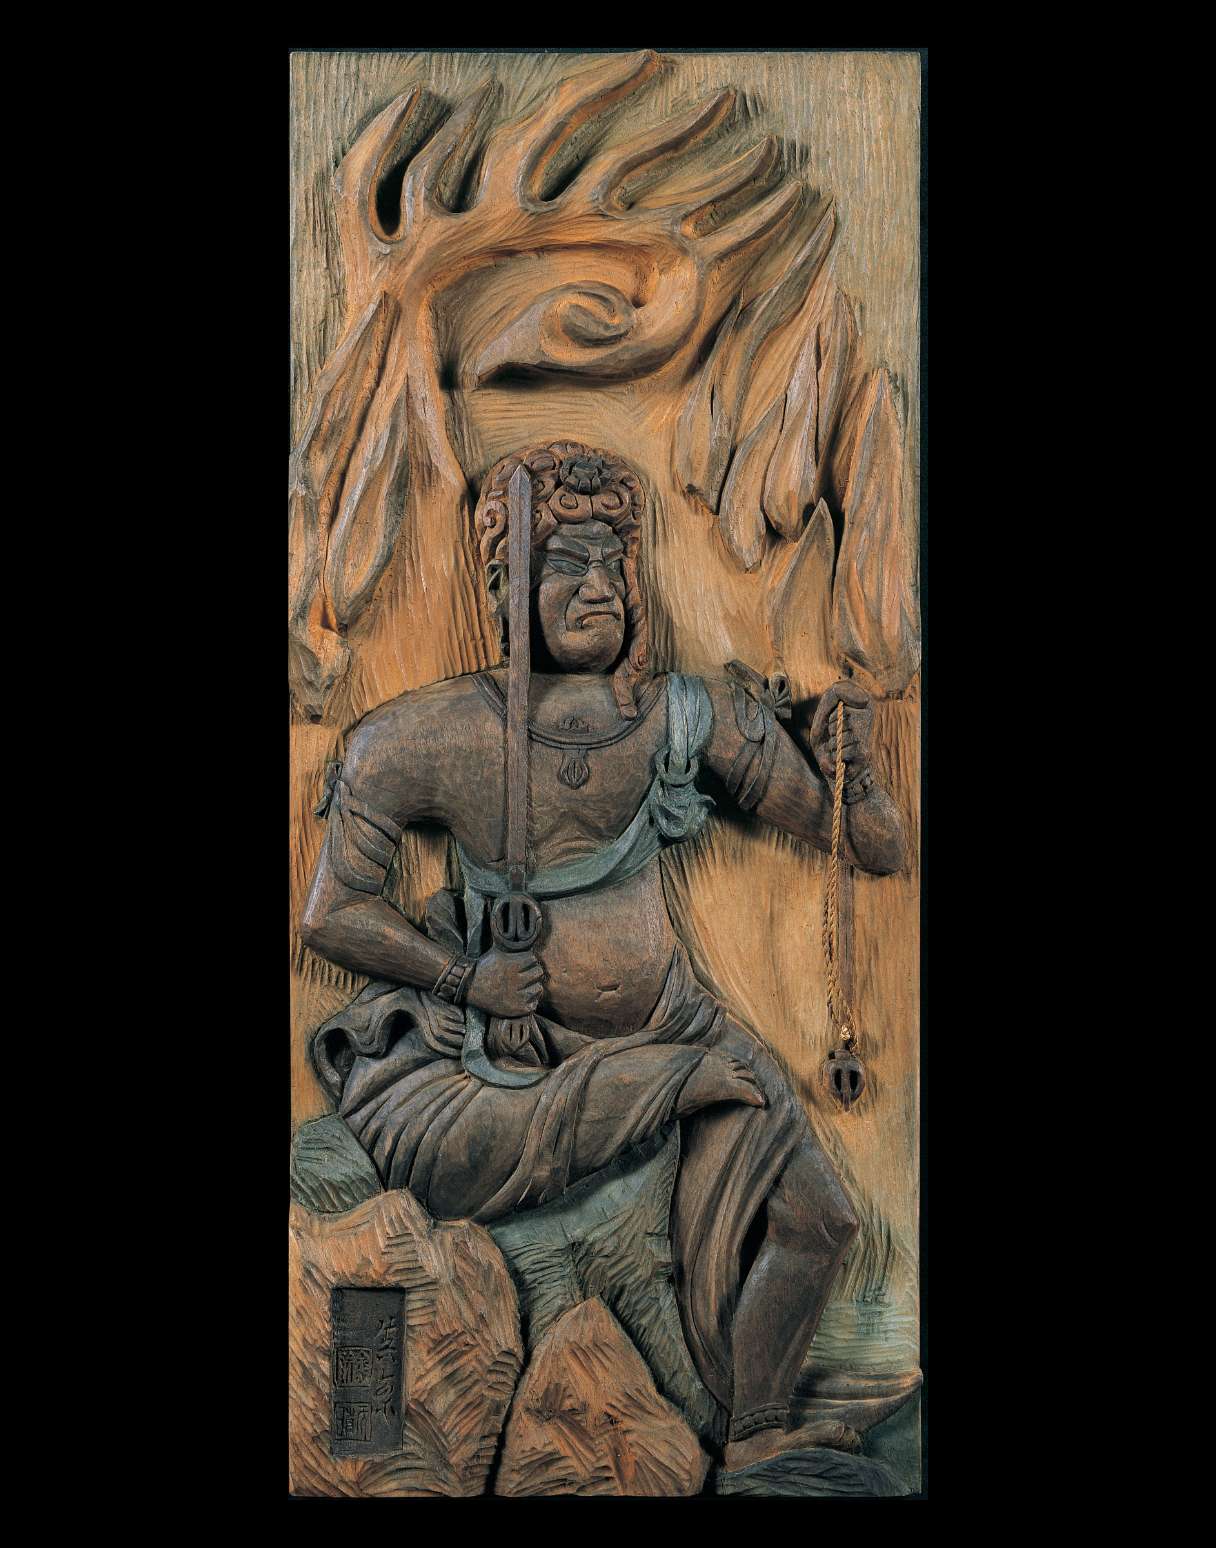 A dark relief image of a scowling figure, seated with one leg akimbo, wearing a sash, jewelry and lower robe, holding a sword in his right hand and noose in left, is carved into a reddish-ochre slab.